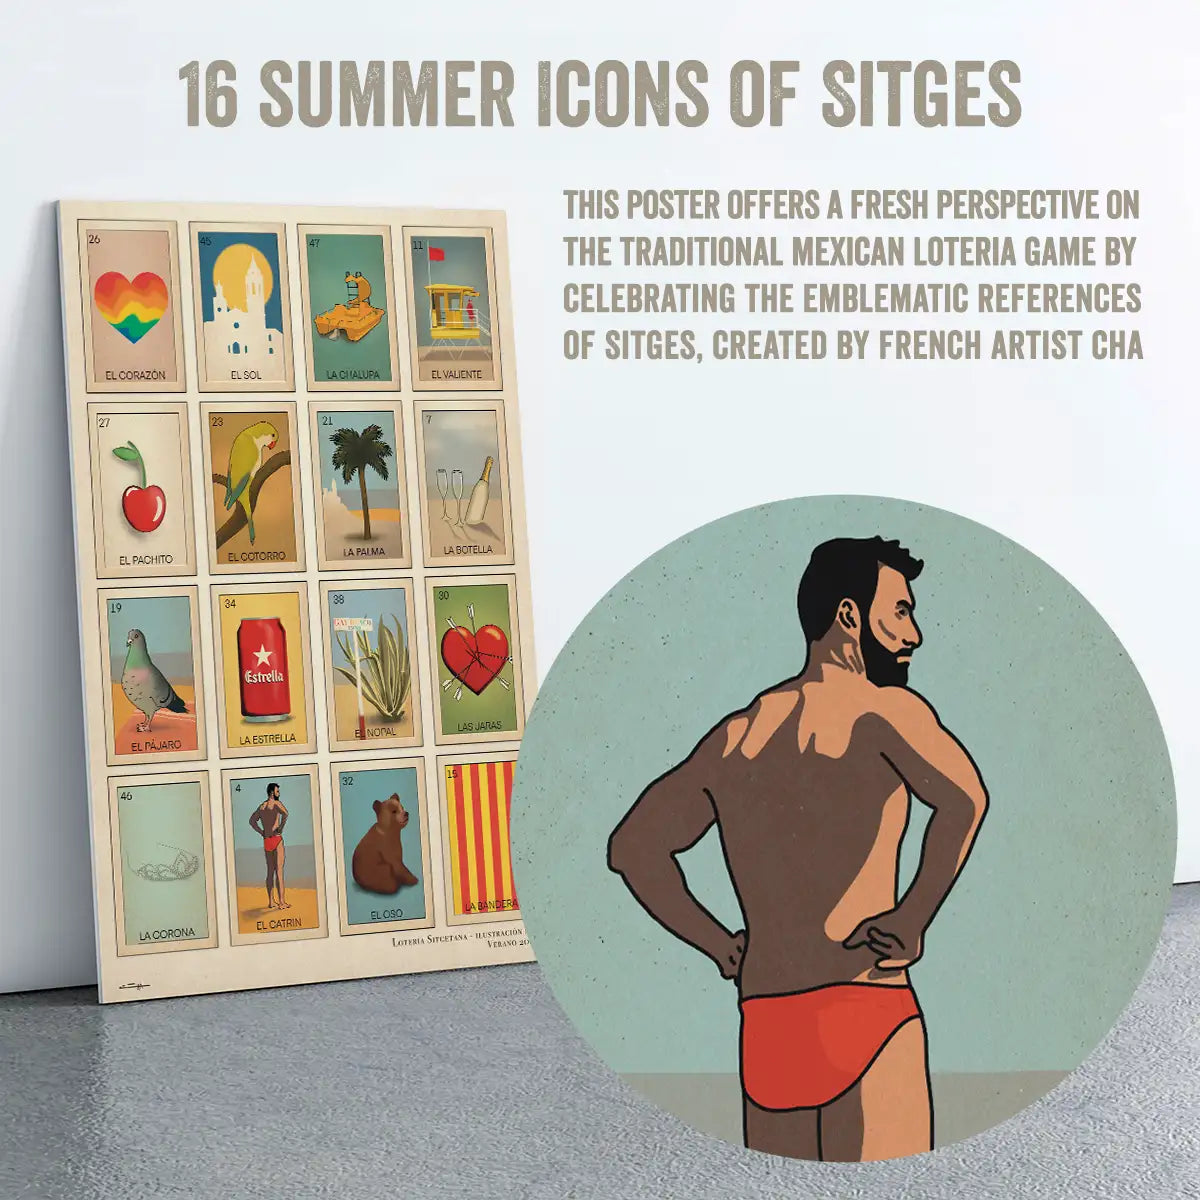 Poster '16 Summer Icons of Sitges' by Cha, featuring reimagined Mexican Loteria cards with Sitges icons